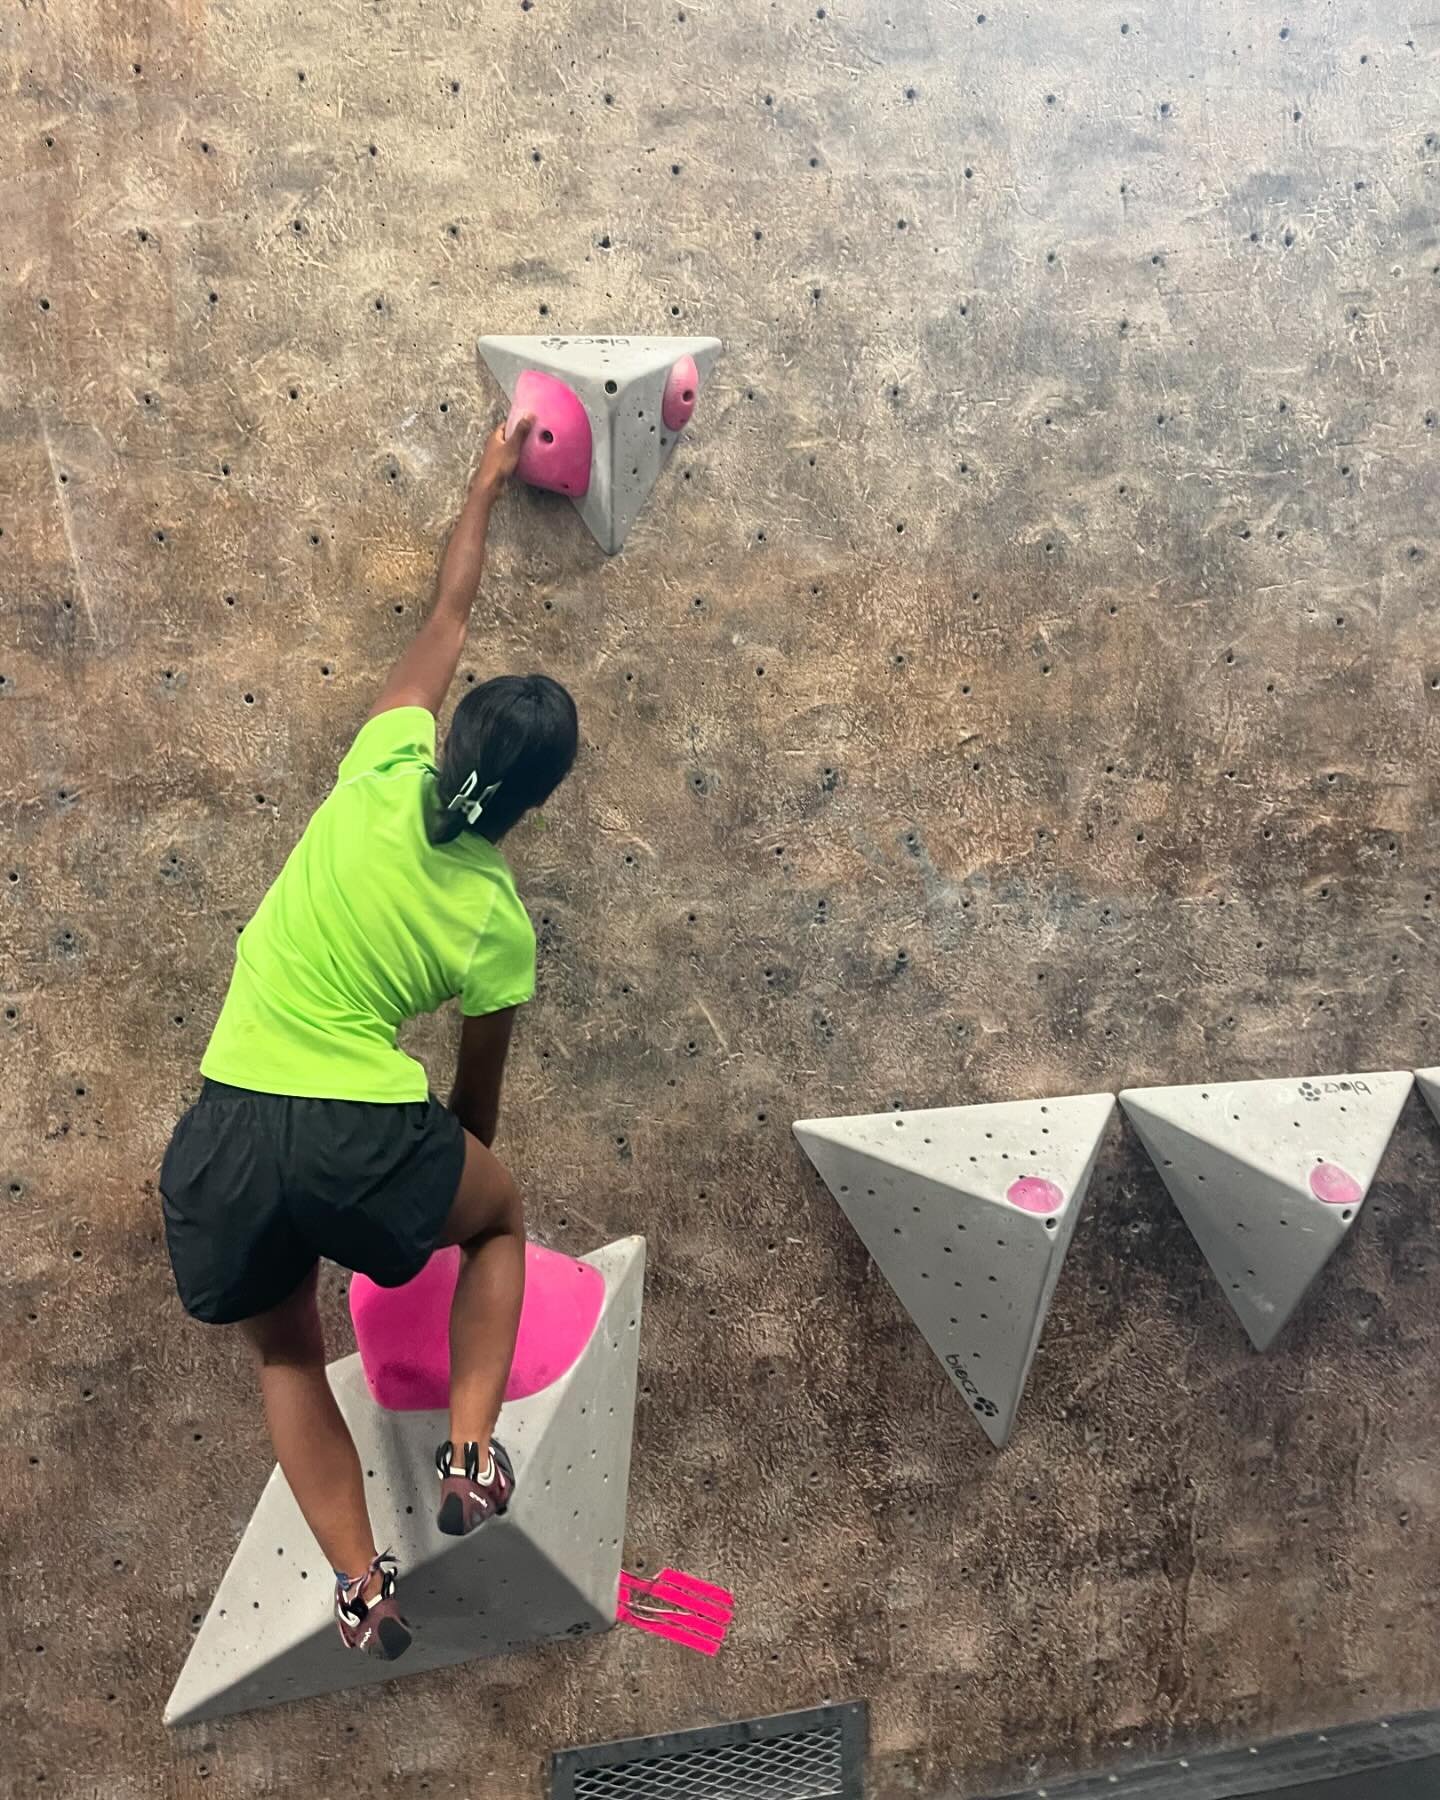 Are you missing a real climbing community in the E. Bay? Check out @bridgesrockgym. Staff are welcoming, diverse all w/o signaling. We had a Comp Team practice there last night and it was so much fun and comfortable to be there. The problems are chal